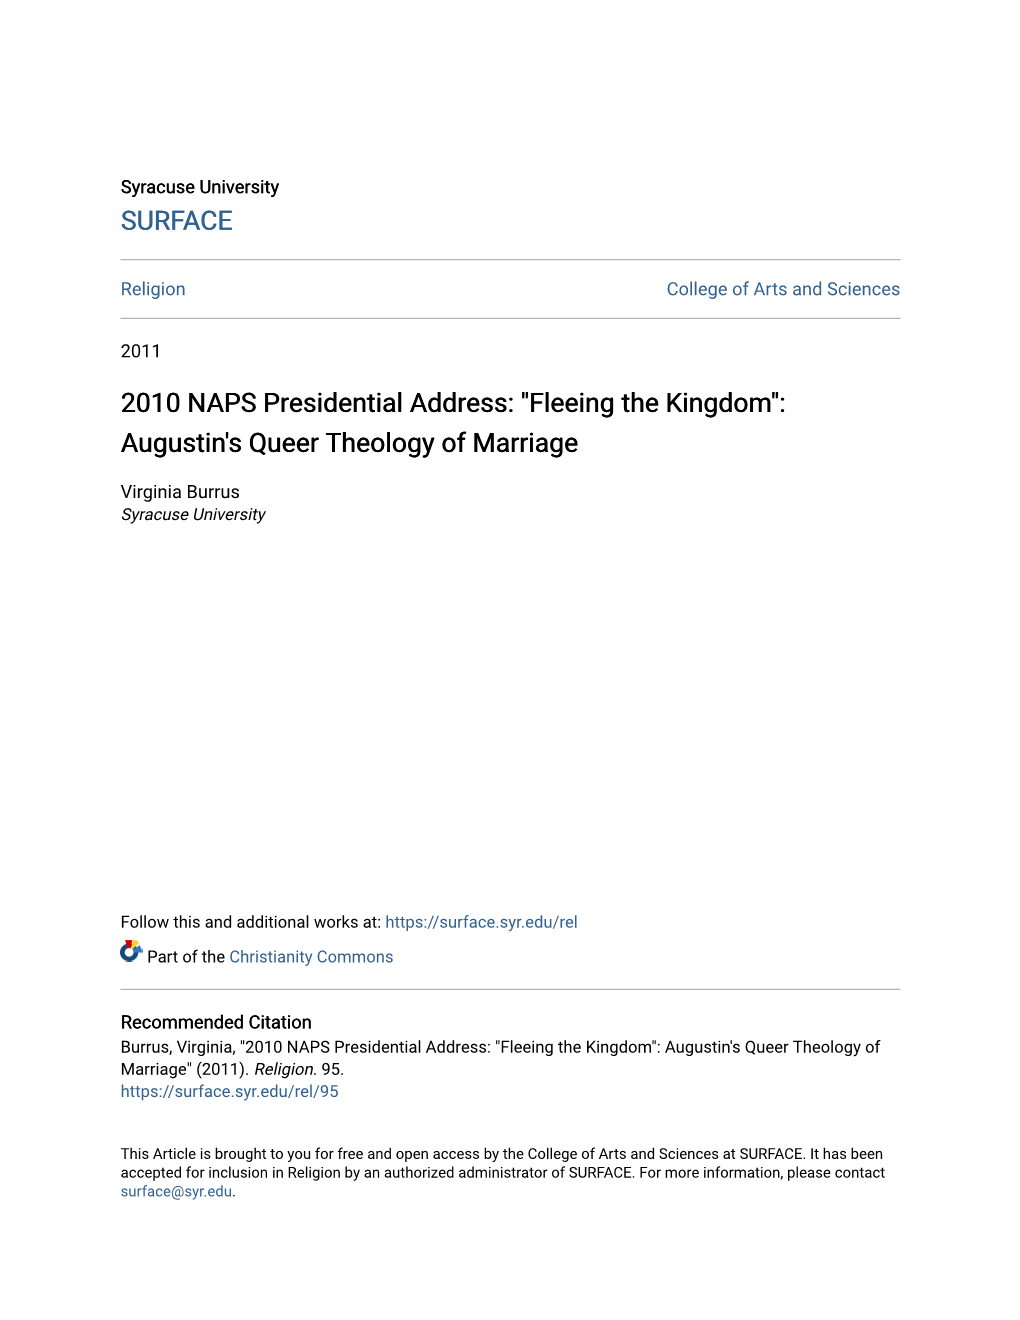 2010 NAPS Presidential Address: "Fleeing the Kingdom": Augustin's Queer Theology of Marriage